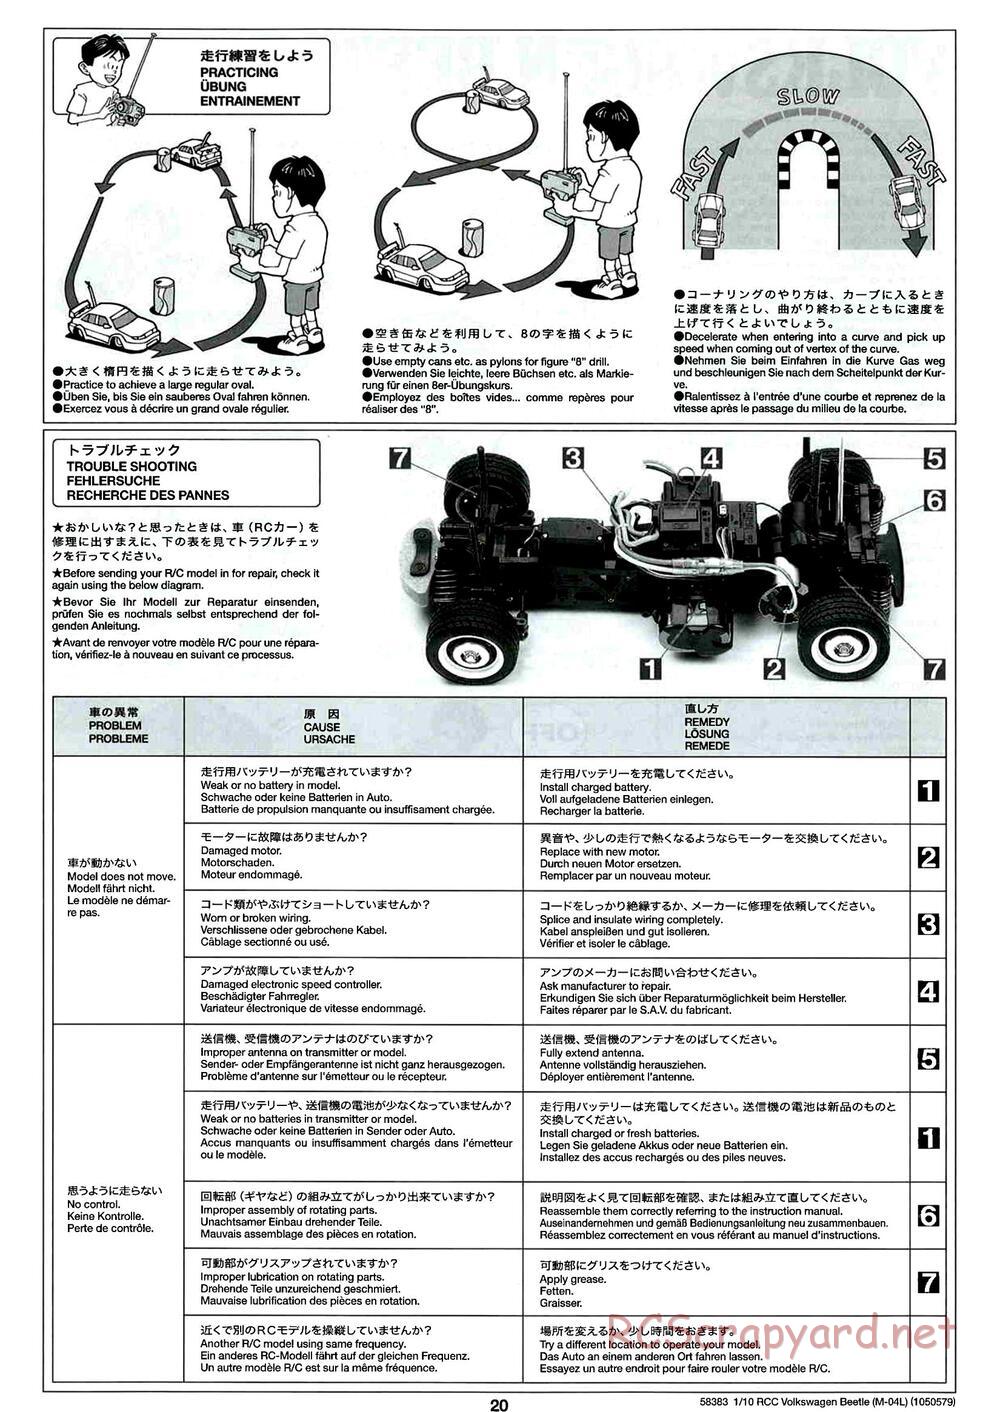 Tamiya - Volkswagen Beetle - M04L Chassis - Manual - Page 20